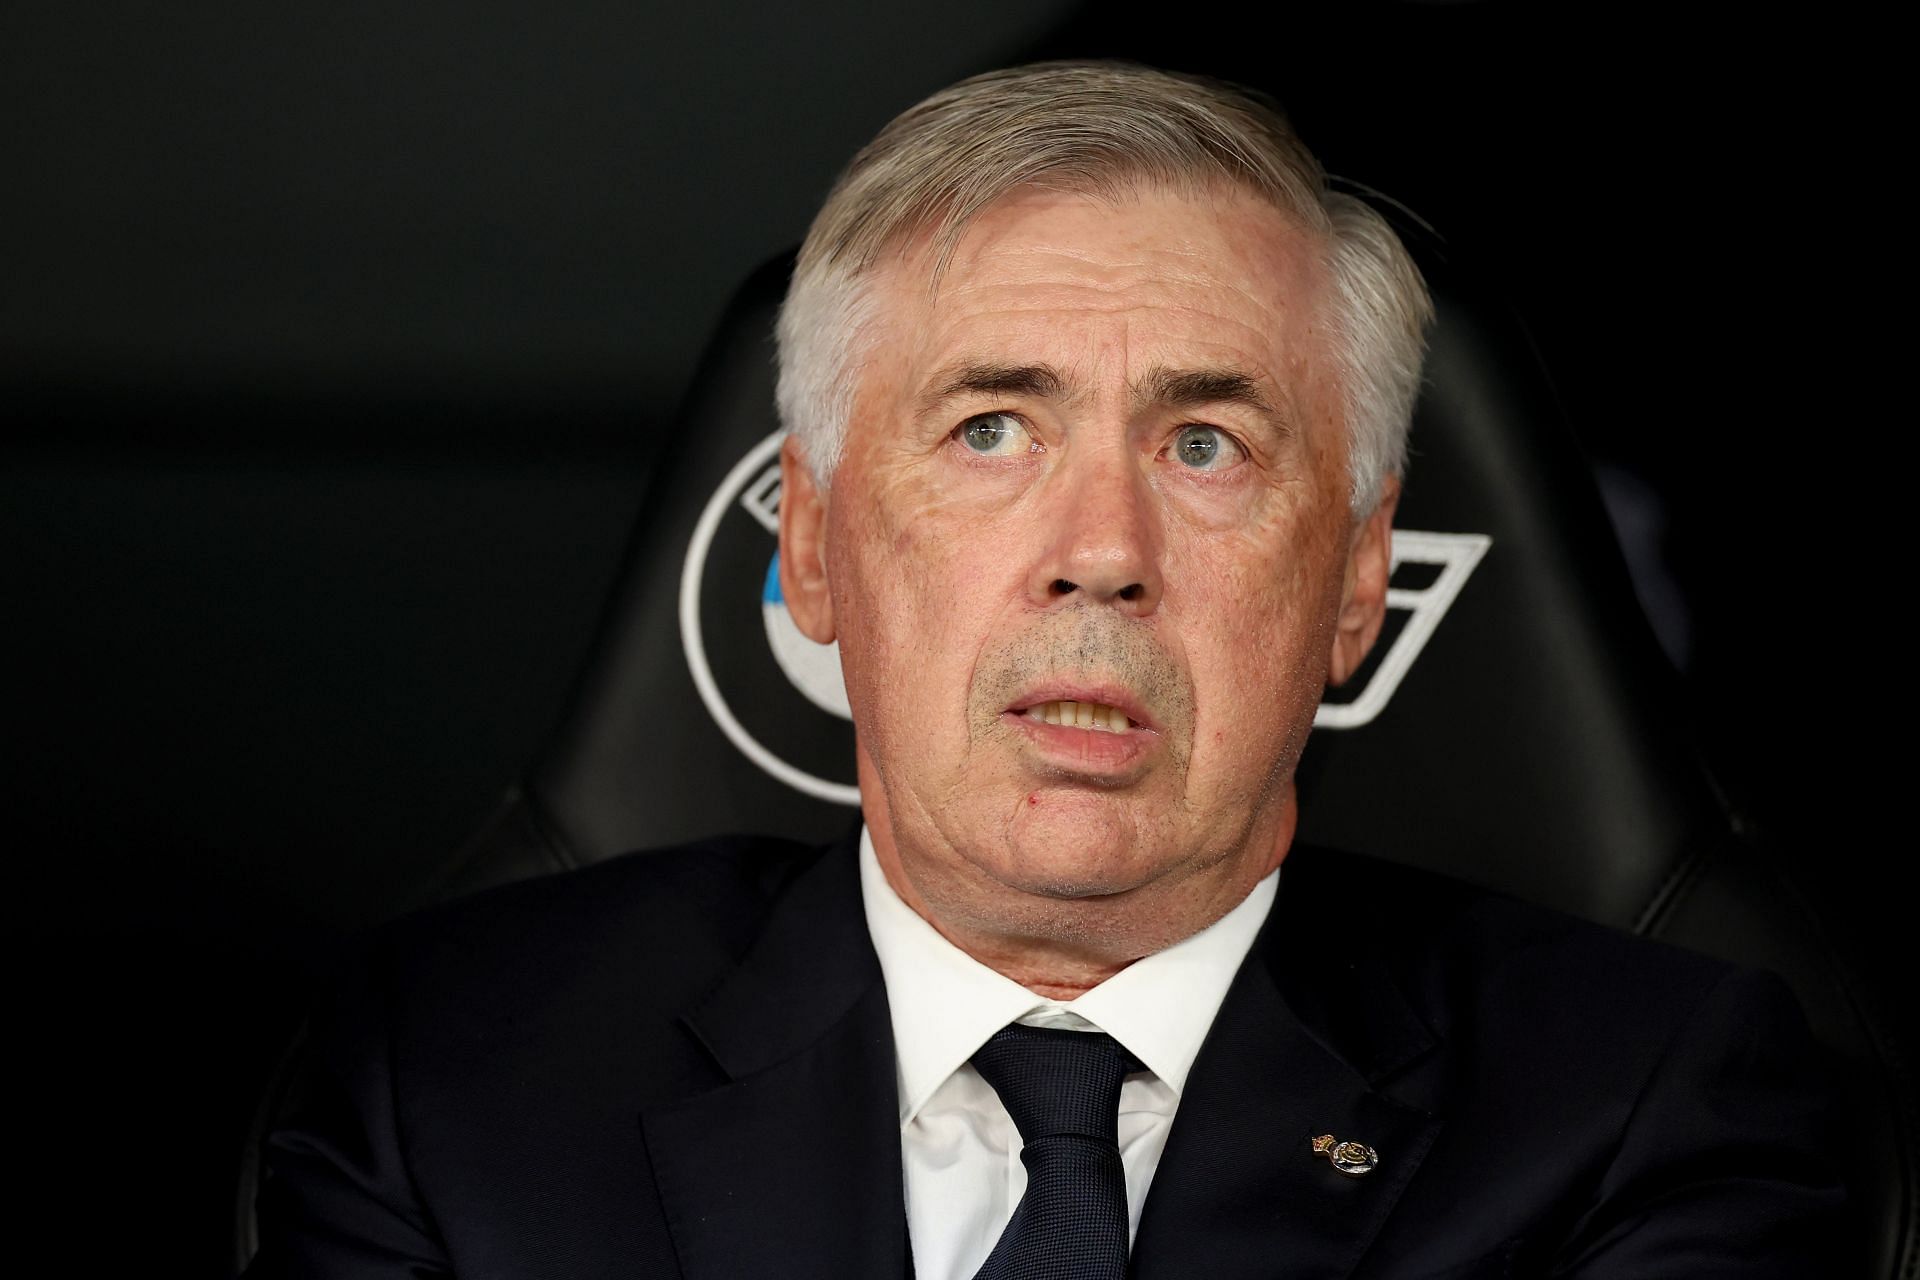 Carlo Ancelotti comments on claims he&#039;s set for the Brazil job.